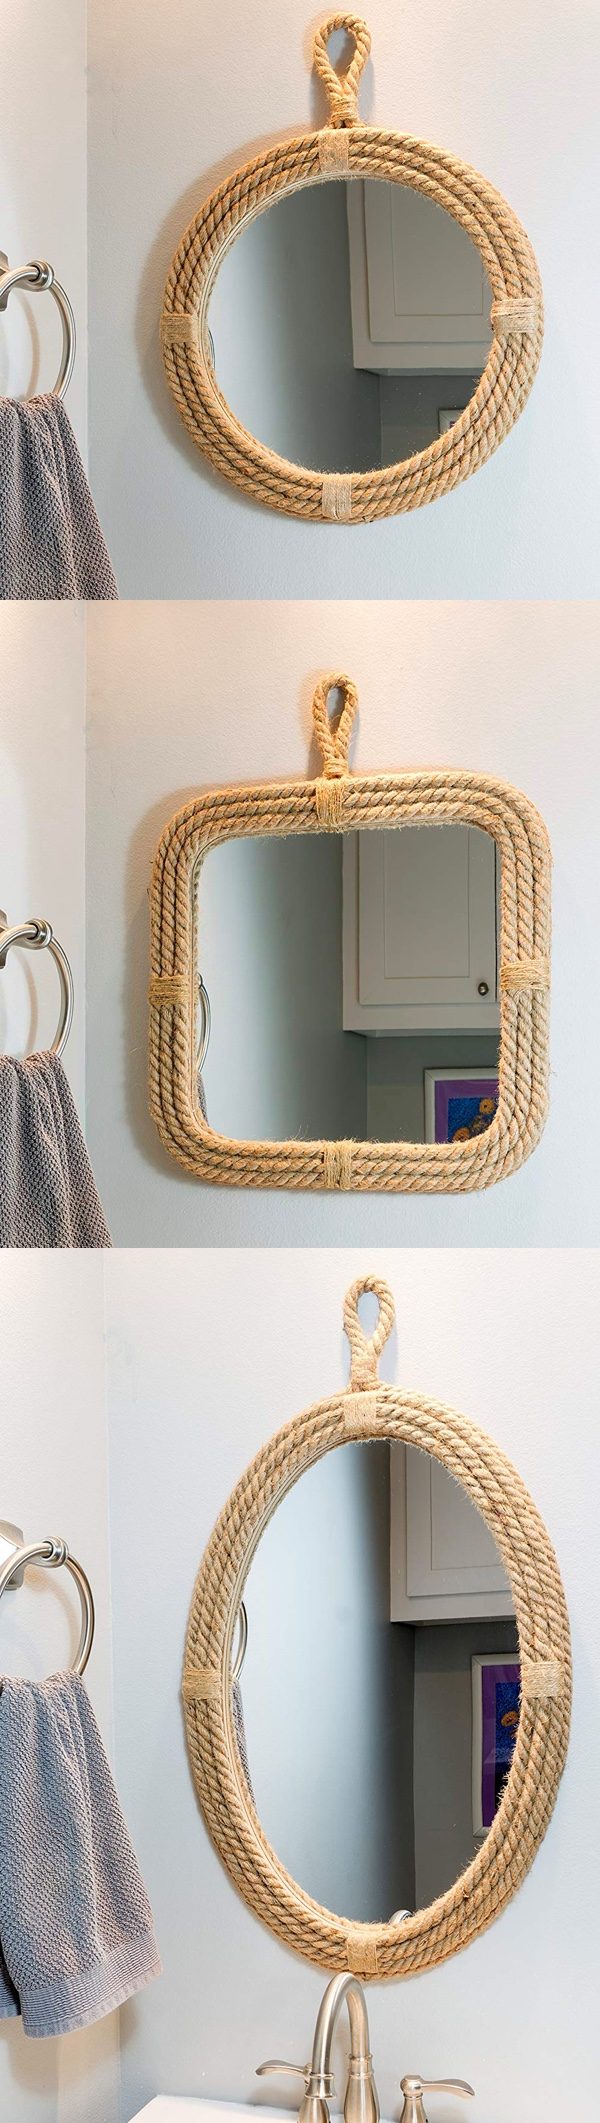 51 Decorative Wall Mirrors To Fill That, Decorative Mirror Frame Ideas